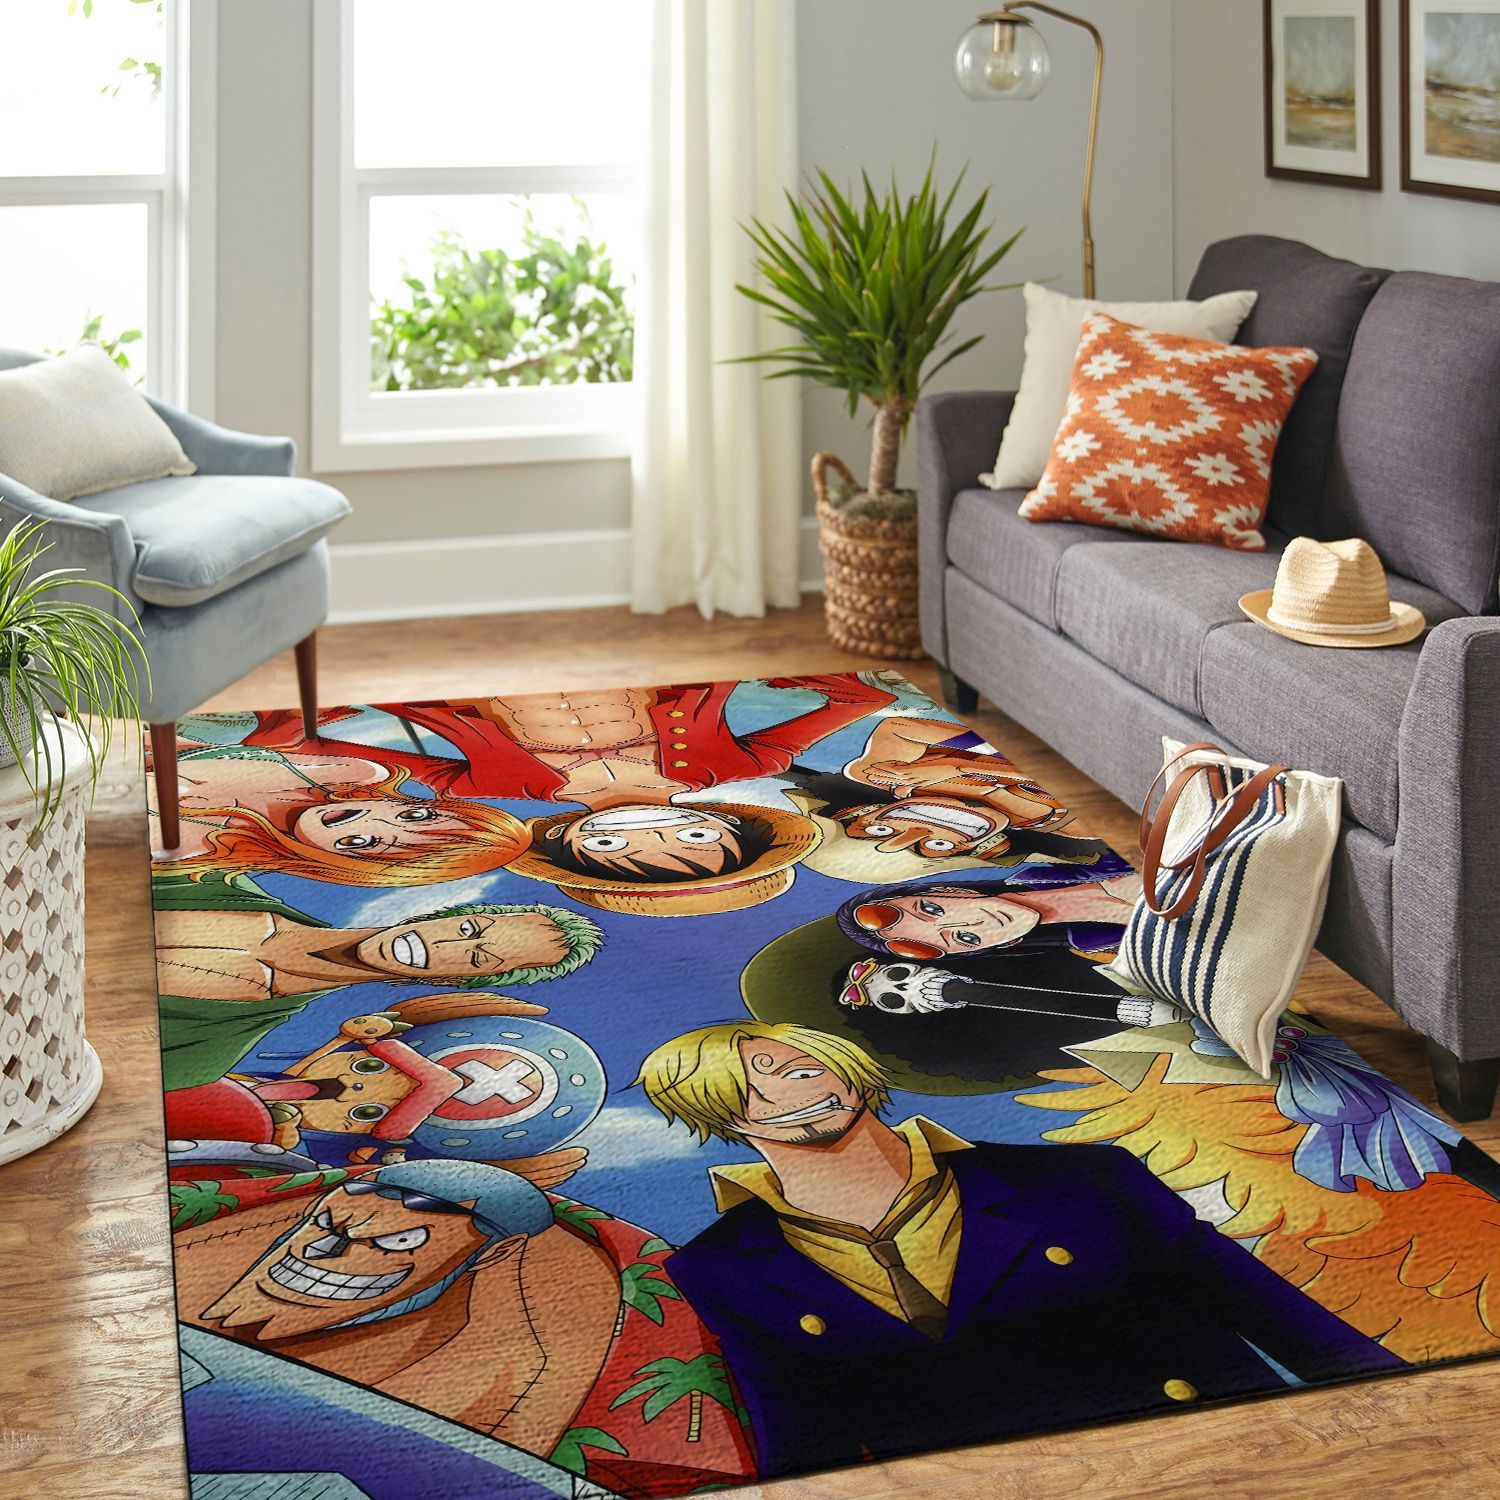 Amazon Onepiece-luffy Living Room Area No6433 Rug